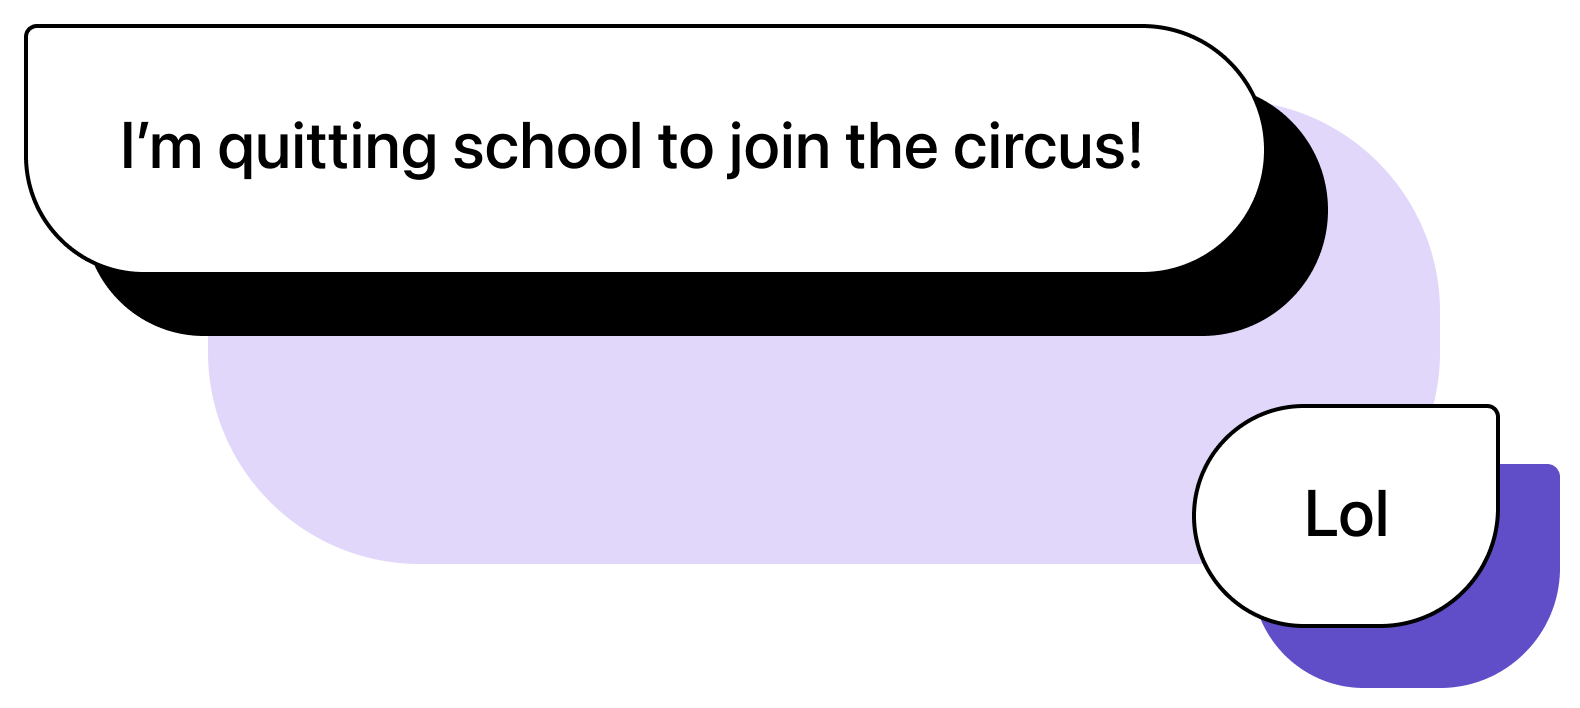 Two chat bubbles graphics. First message: "I'm quitting school to join the circus!". Second message: "Lol"